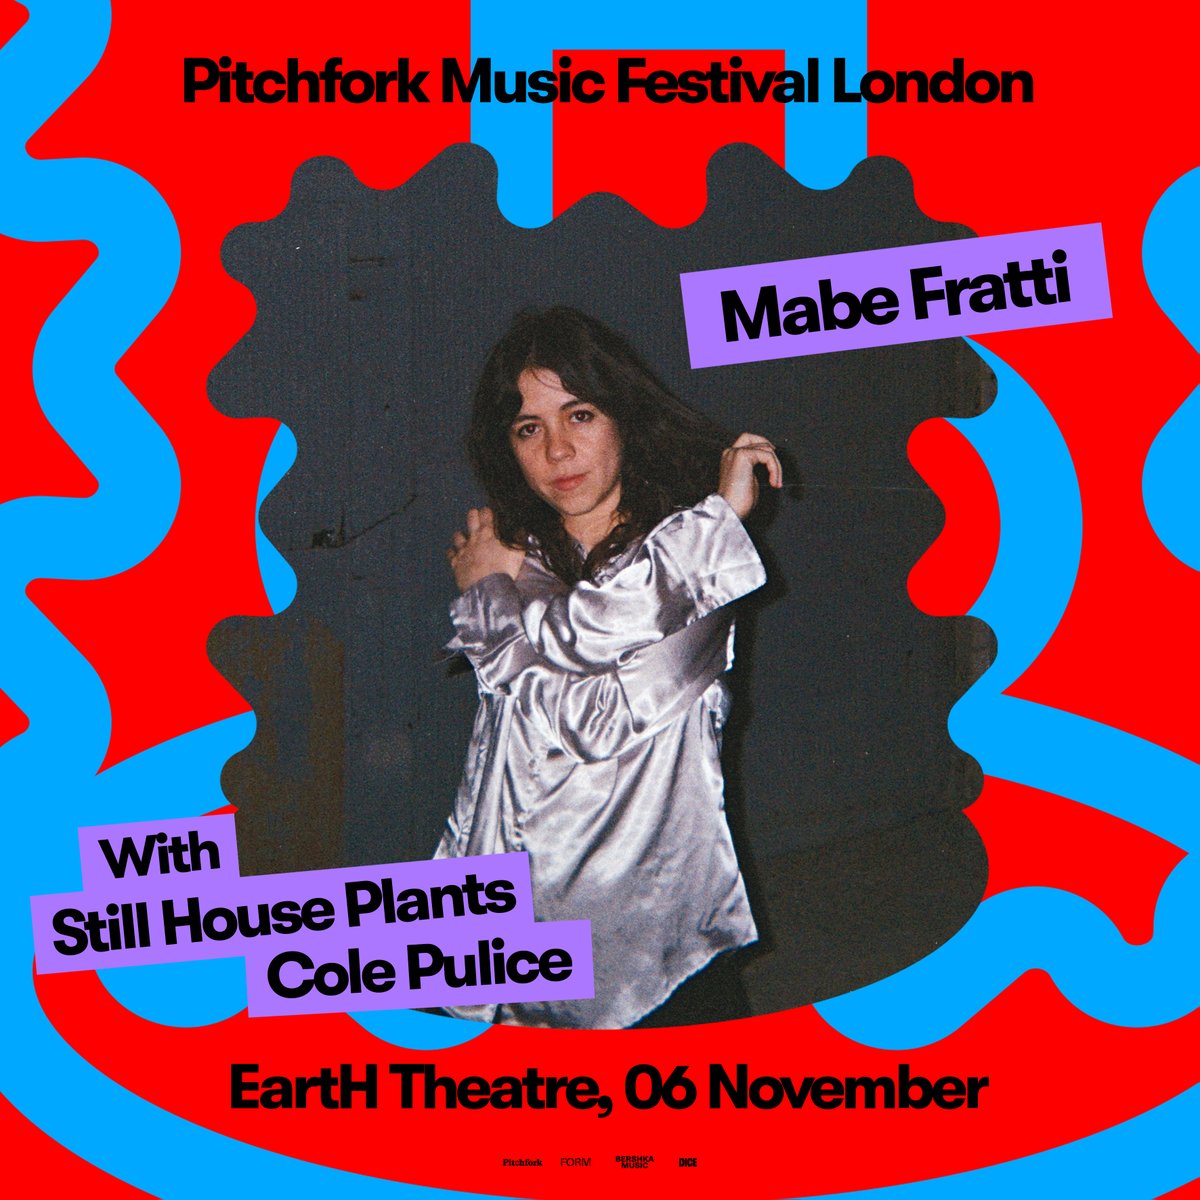 WEDNESDAY 6TH NOVEMBER Fabric, London Billy Woods of @armandhammernyc / @moormother @Goyagumbani / @elucidwho EartH Theatre, London @mabefratti / Still House Plants / @colepulice Full details at pitchforklondon.com